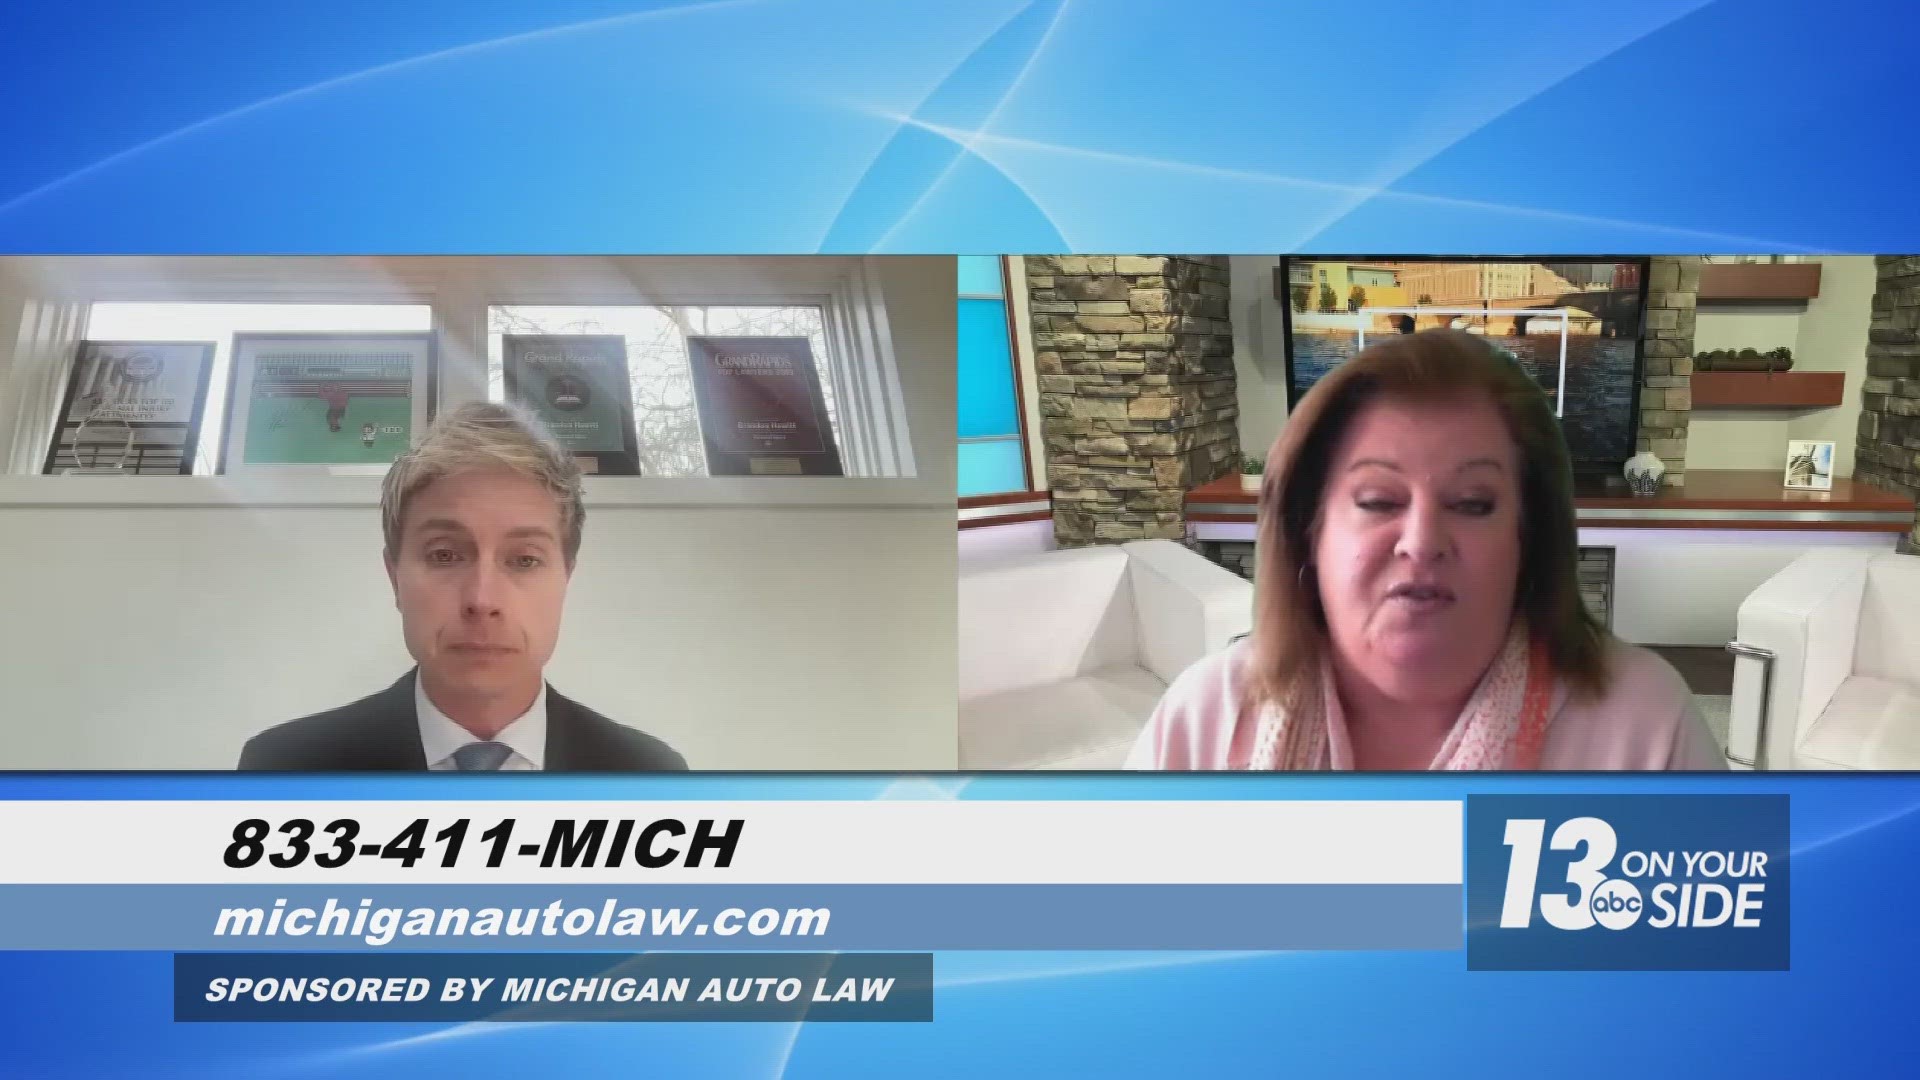 Back in 2019, Michigan’s no-fault insurance law underwent some changes that impacted people catastrophically injured in car crashes.